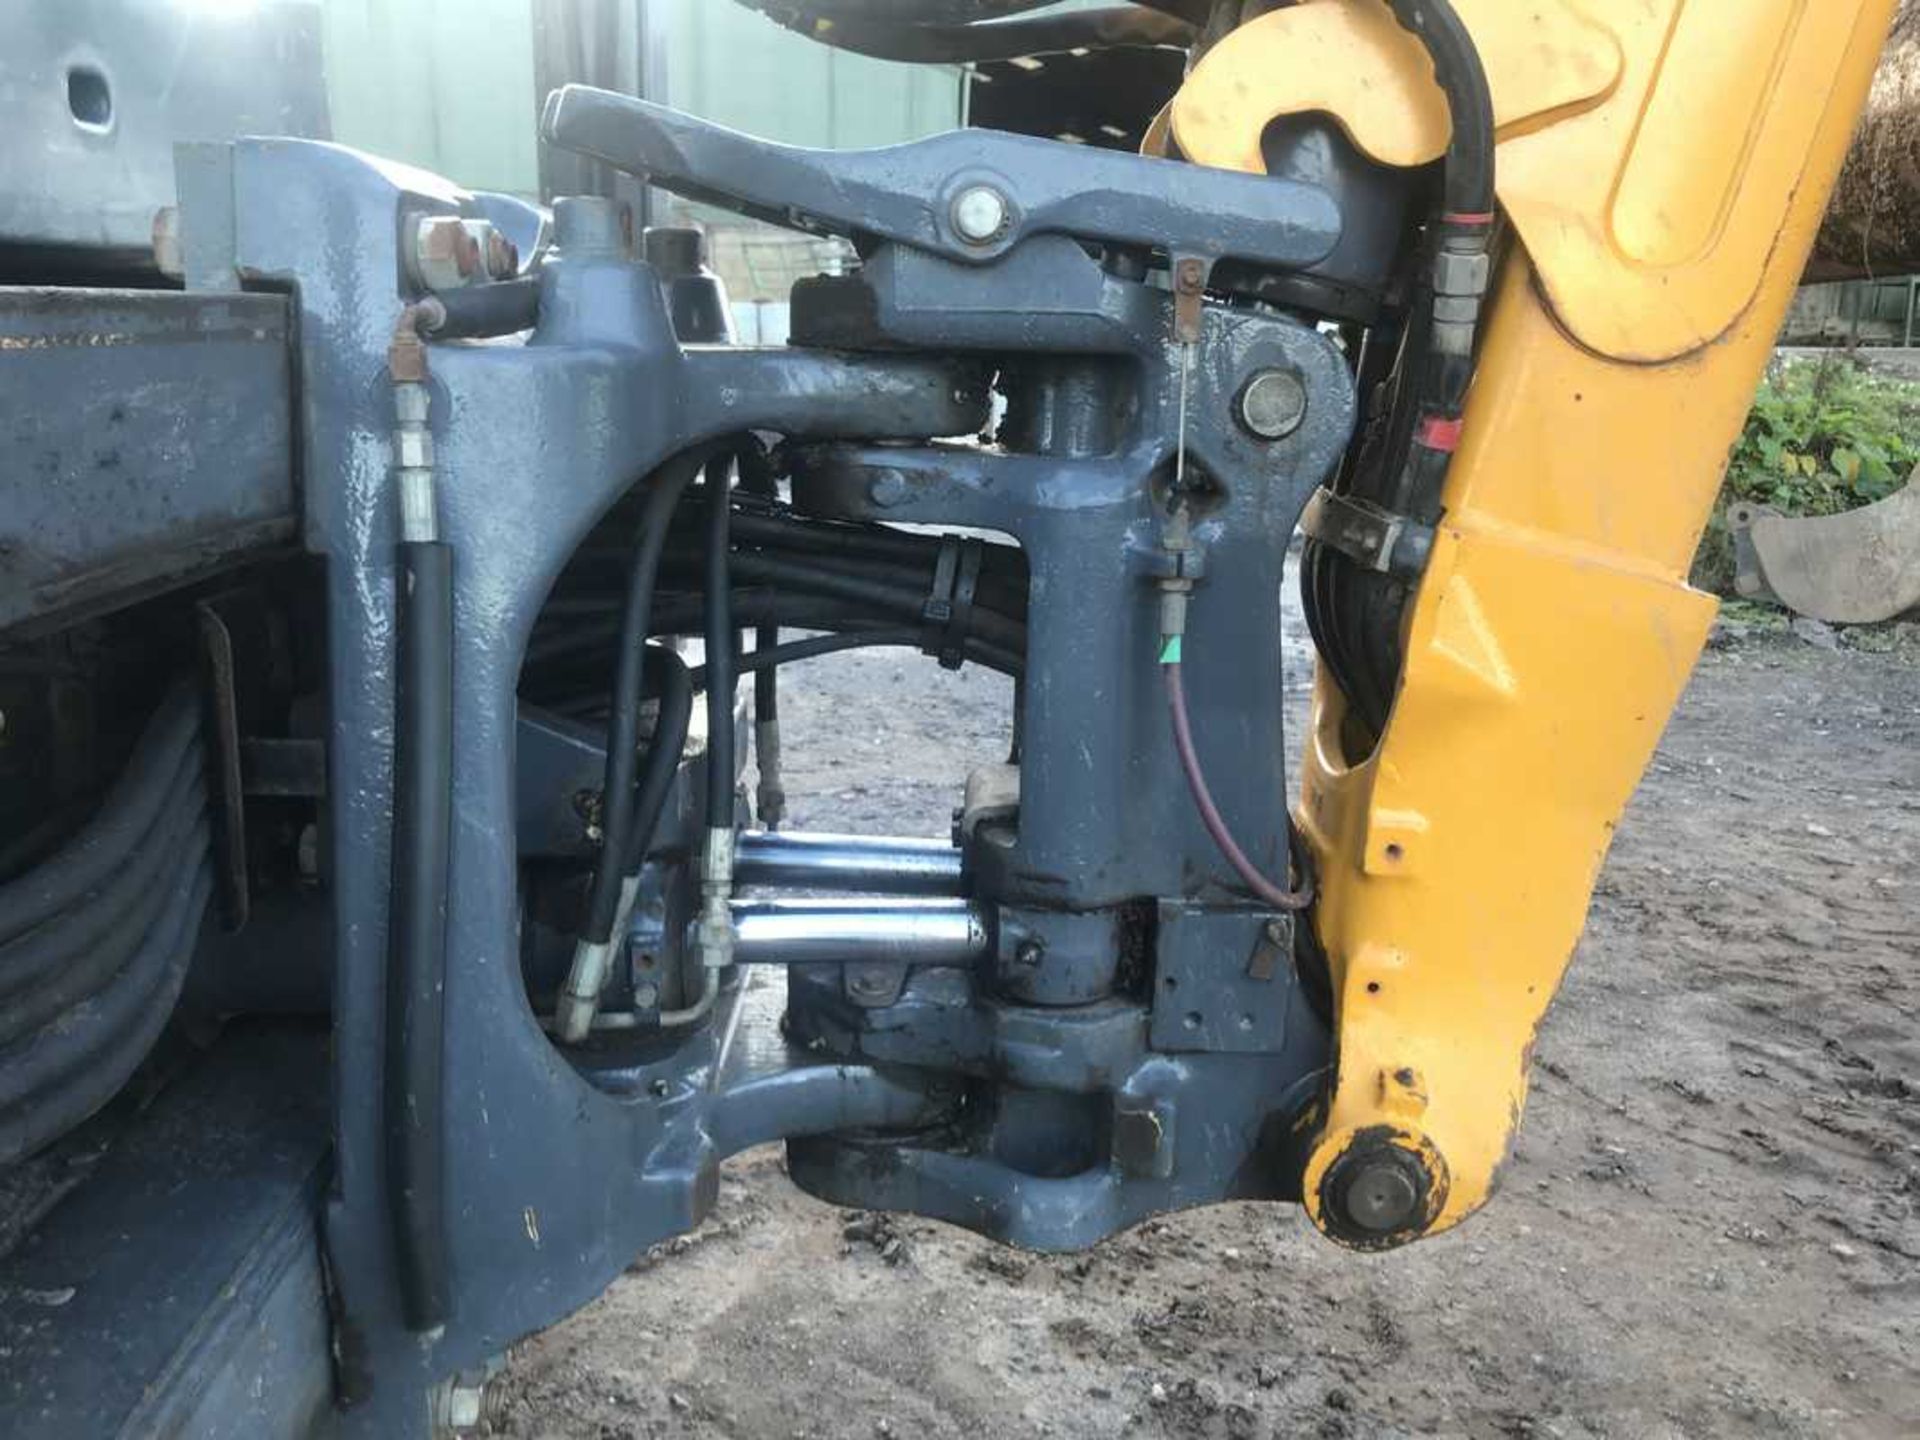 2011 TEREX 880 backhoe digger loader, full set of 5 buckets, Quick hitch, 3737 hrs (not verified), R - Image 9 of 11